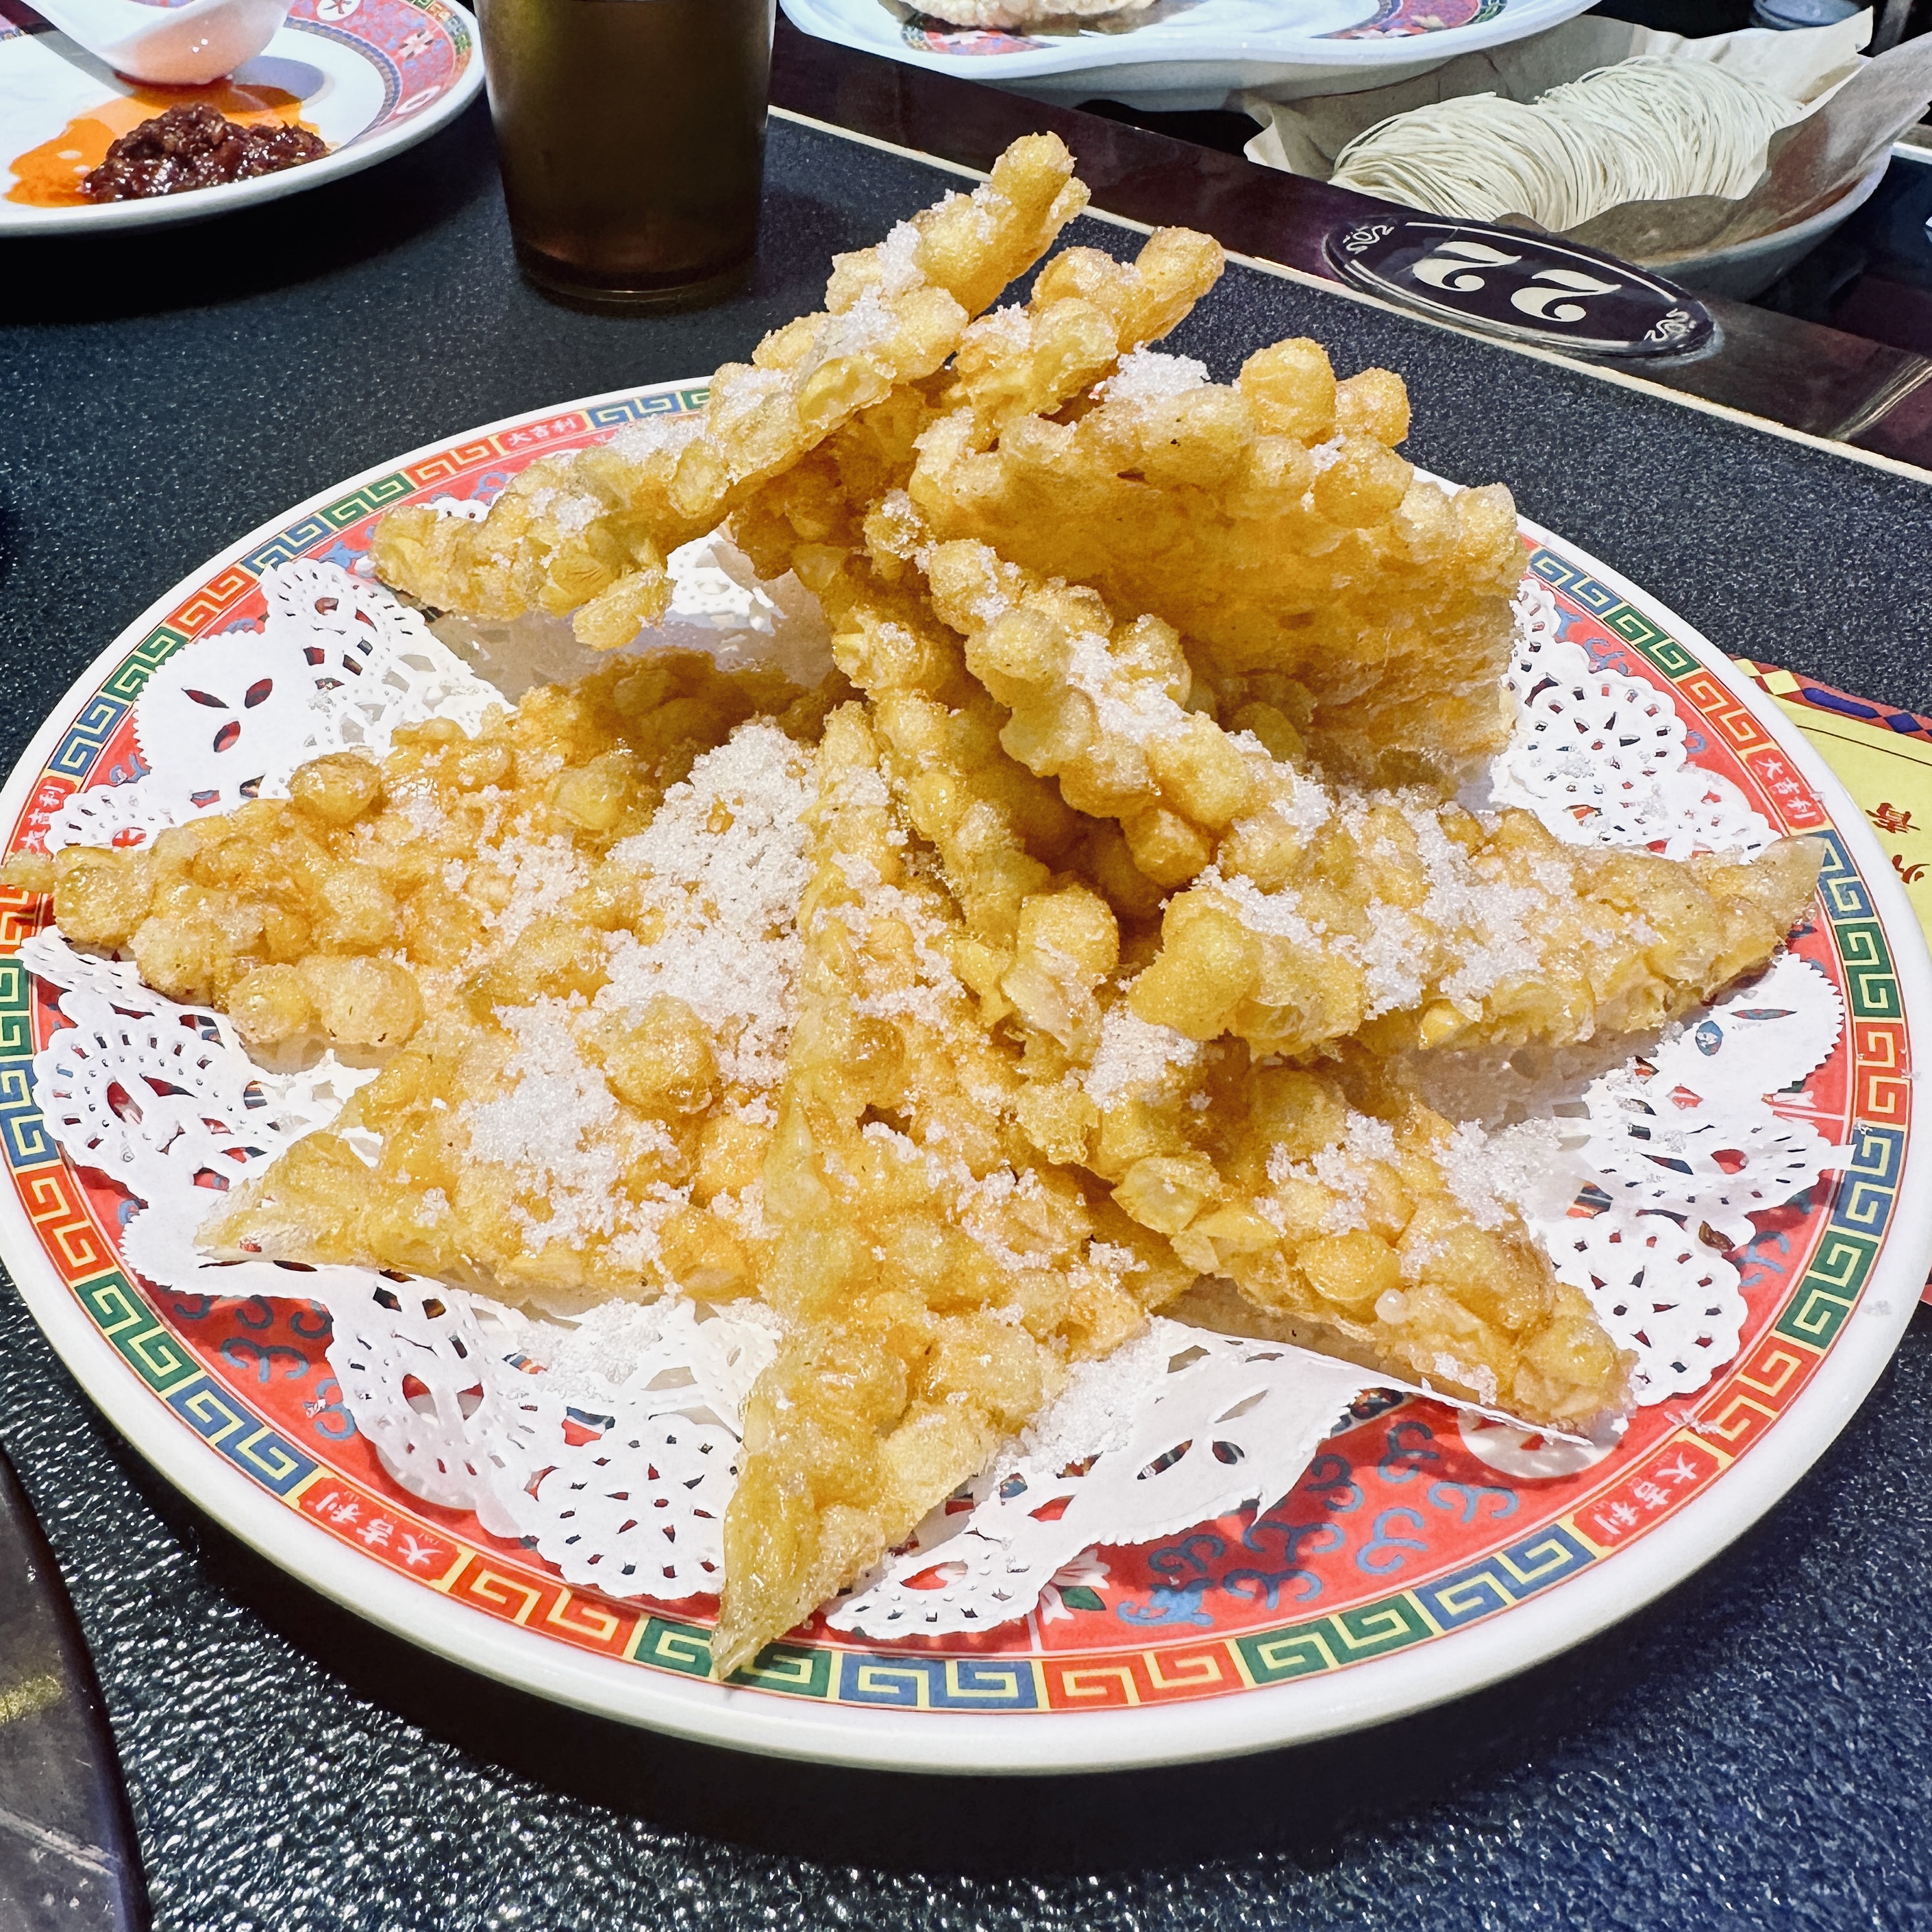 A photo of yumi lao, which looks like like (and is) a sugary mass of fried corn.